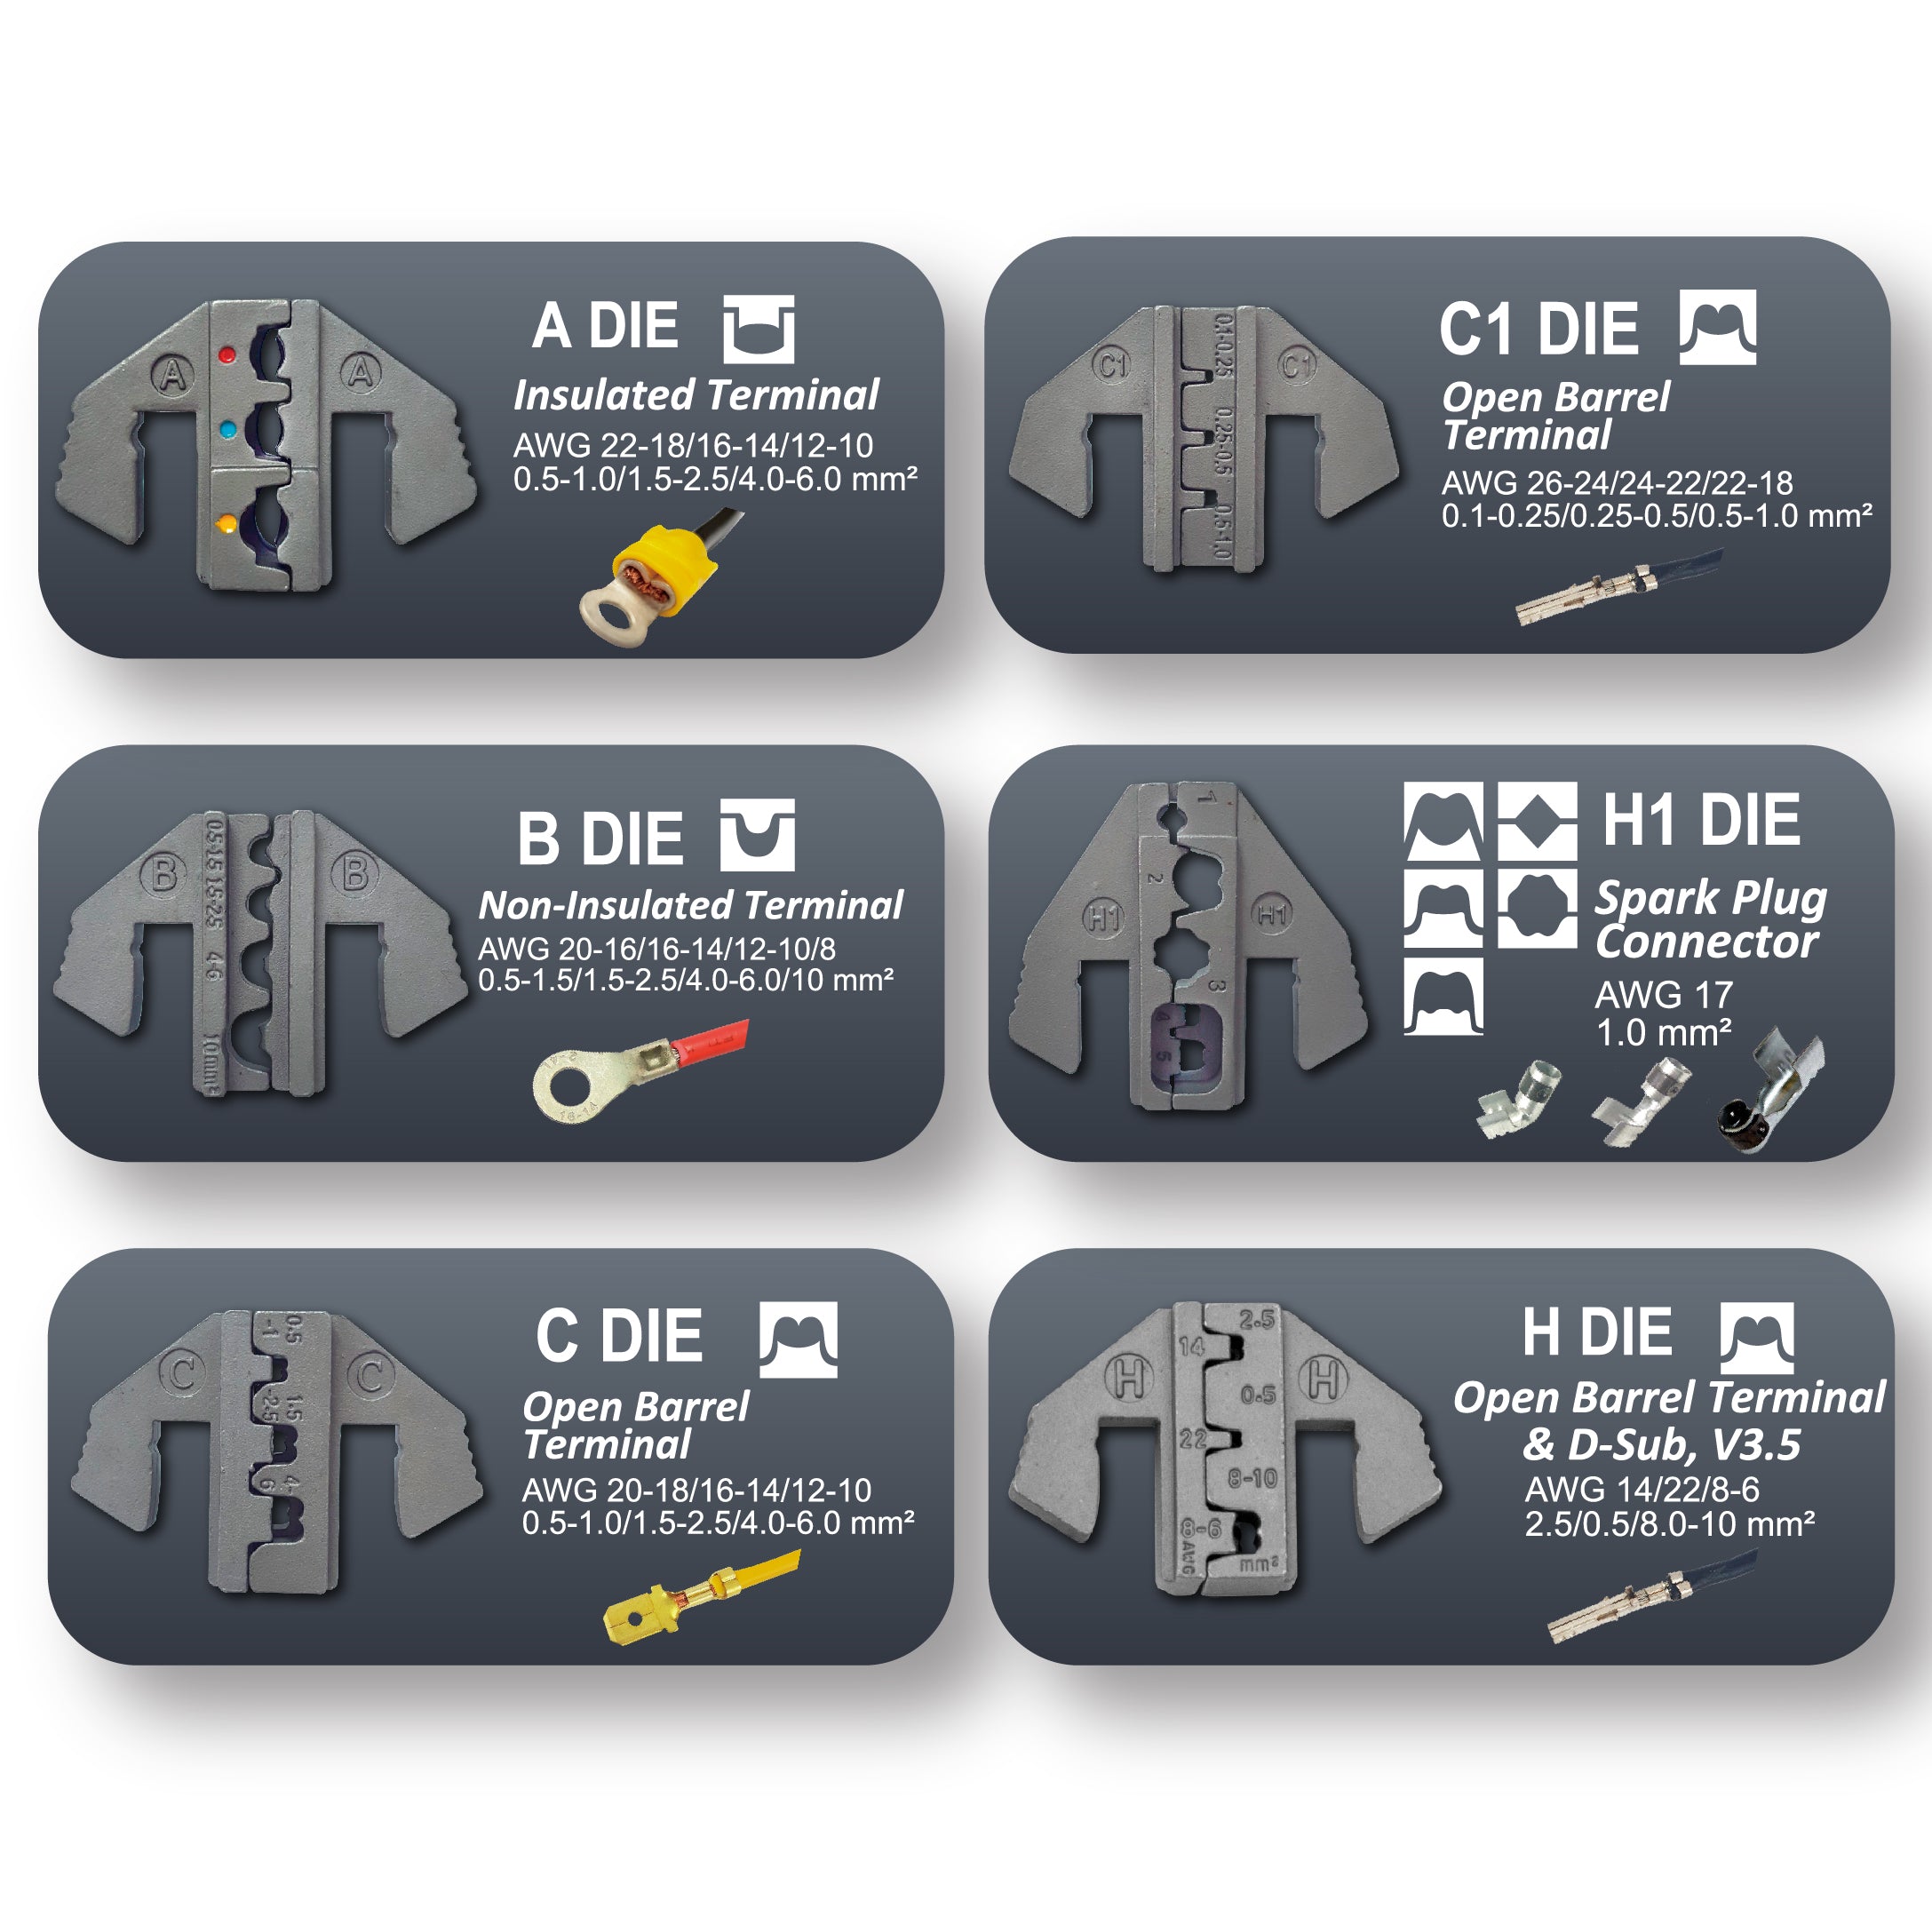 Crimping Tool Die Set - A, B, C, C1, H1, H Dies for Insulated, Non Insulated, Open Barrel & Spark Plug Terminals